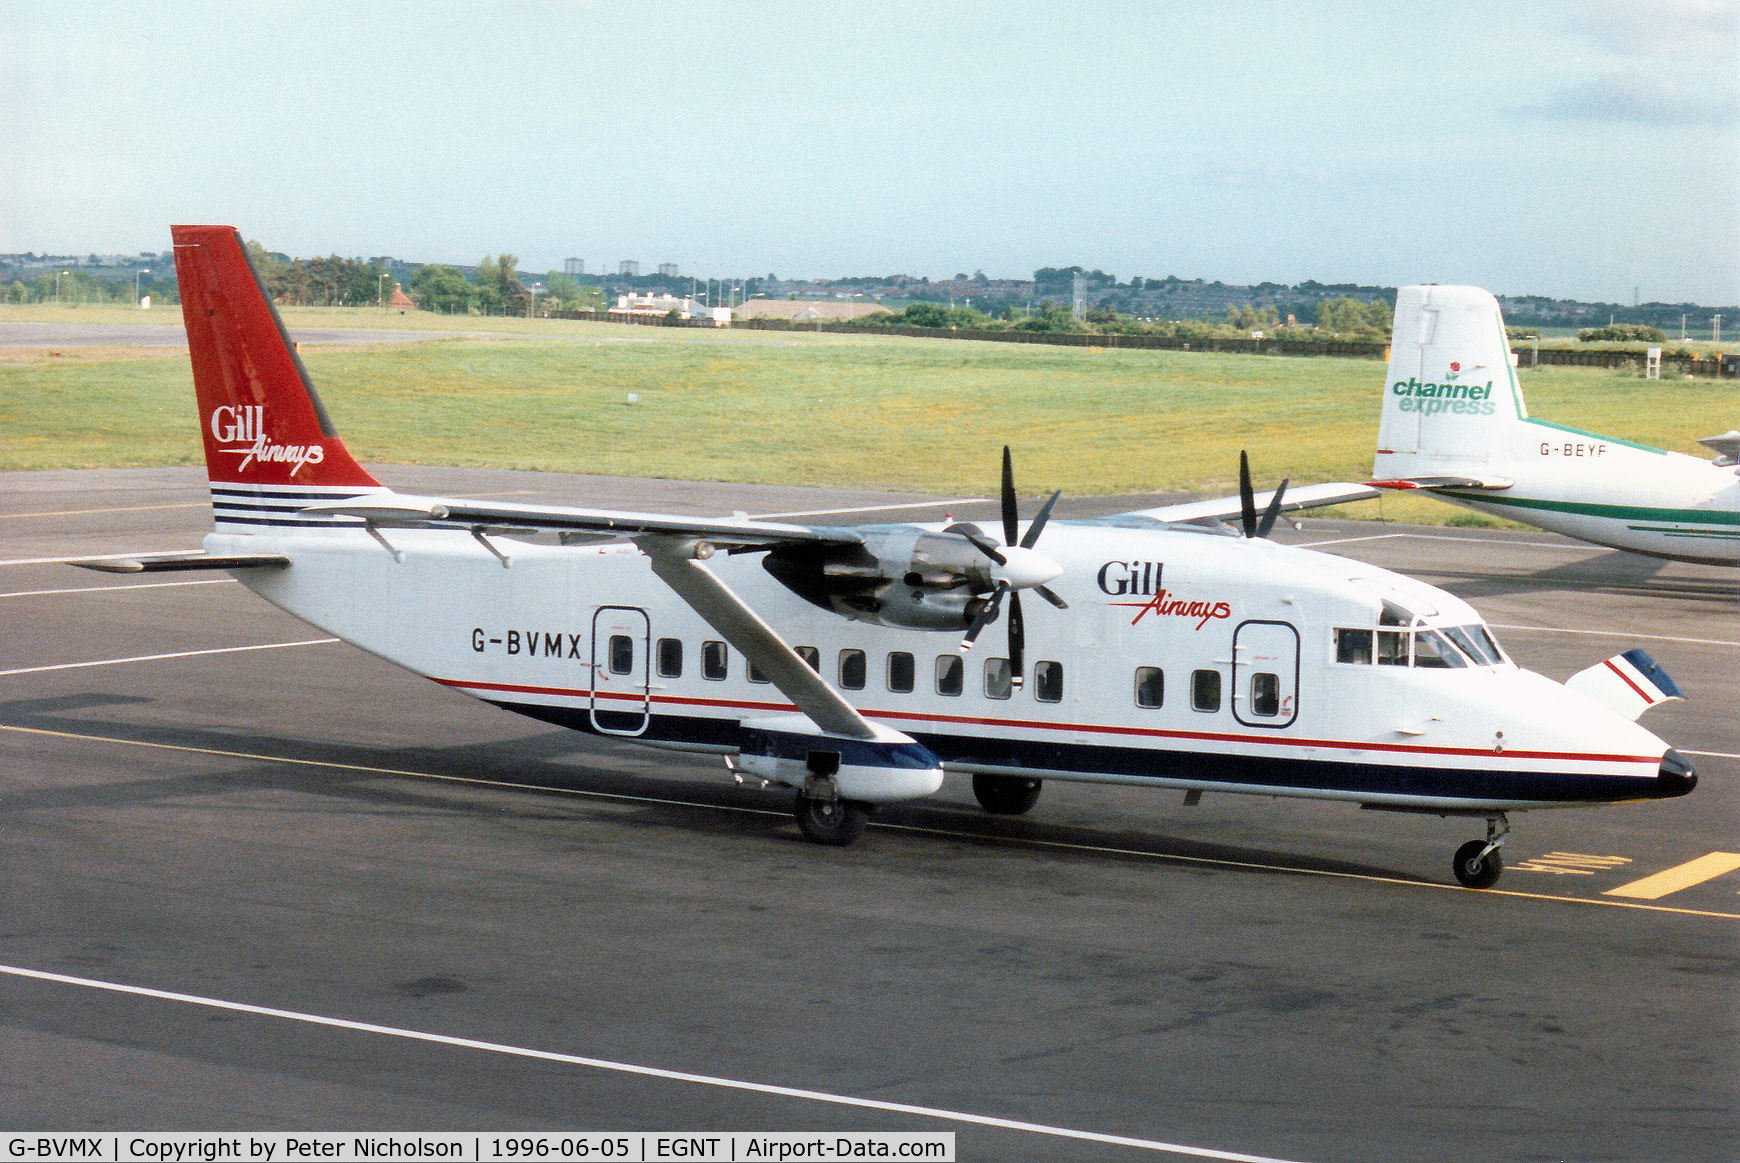 G-BVMX, 1988 Short SD3-60-200 C/N SH.3751, Shorts 360 of Gill Airways at Newcastle in the Summer of 1996.